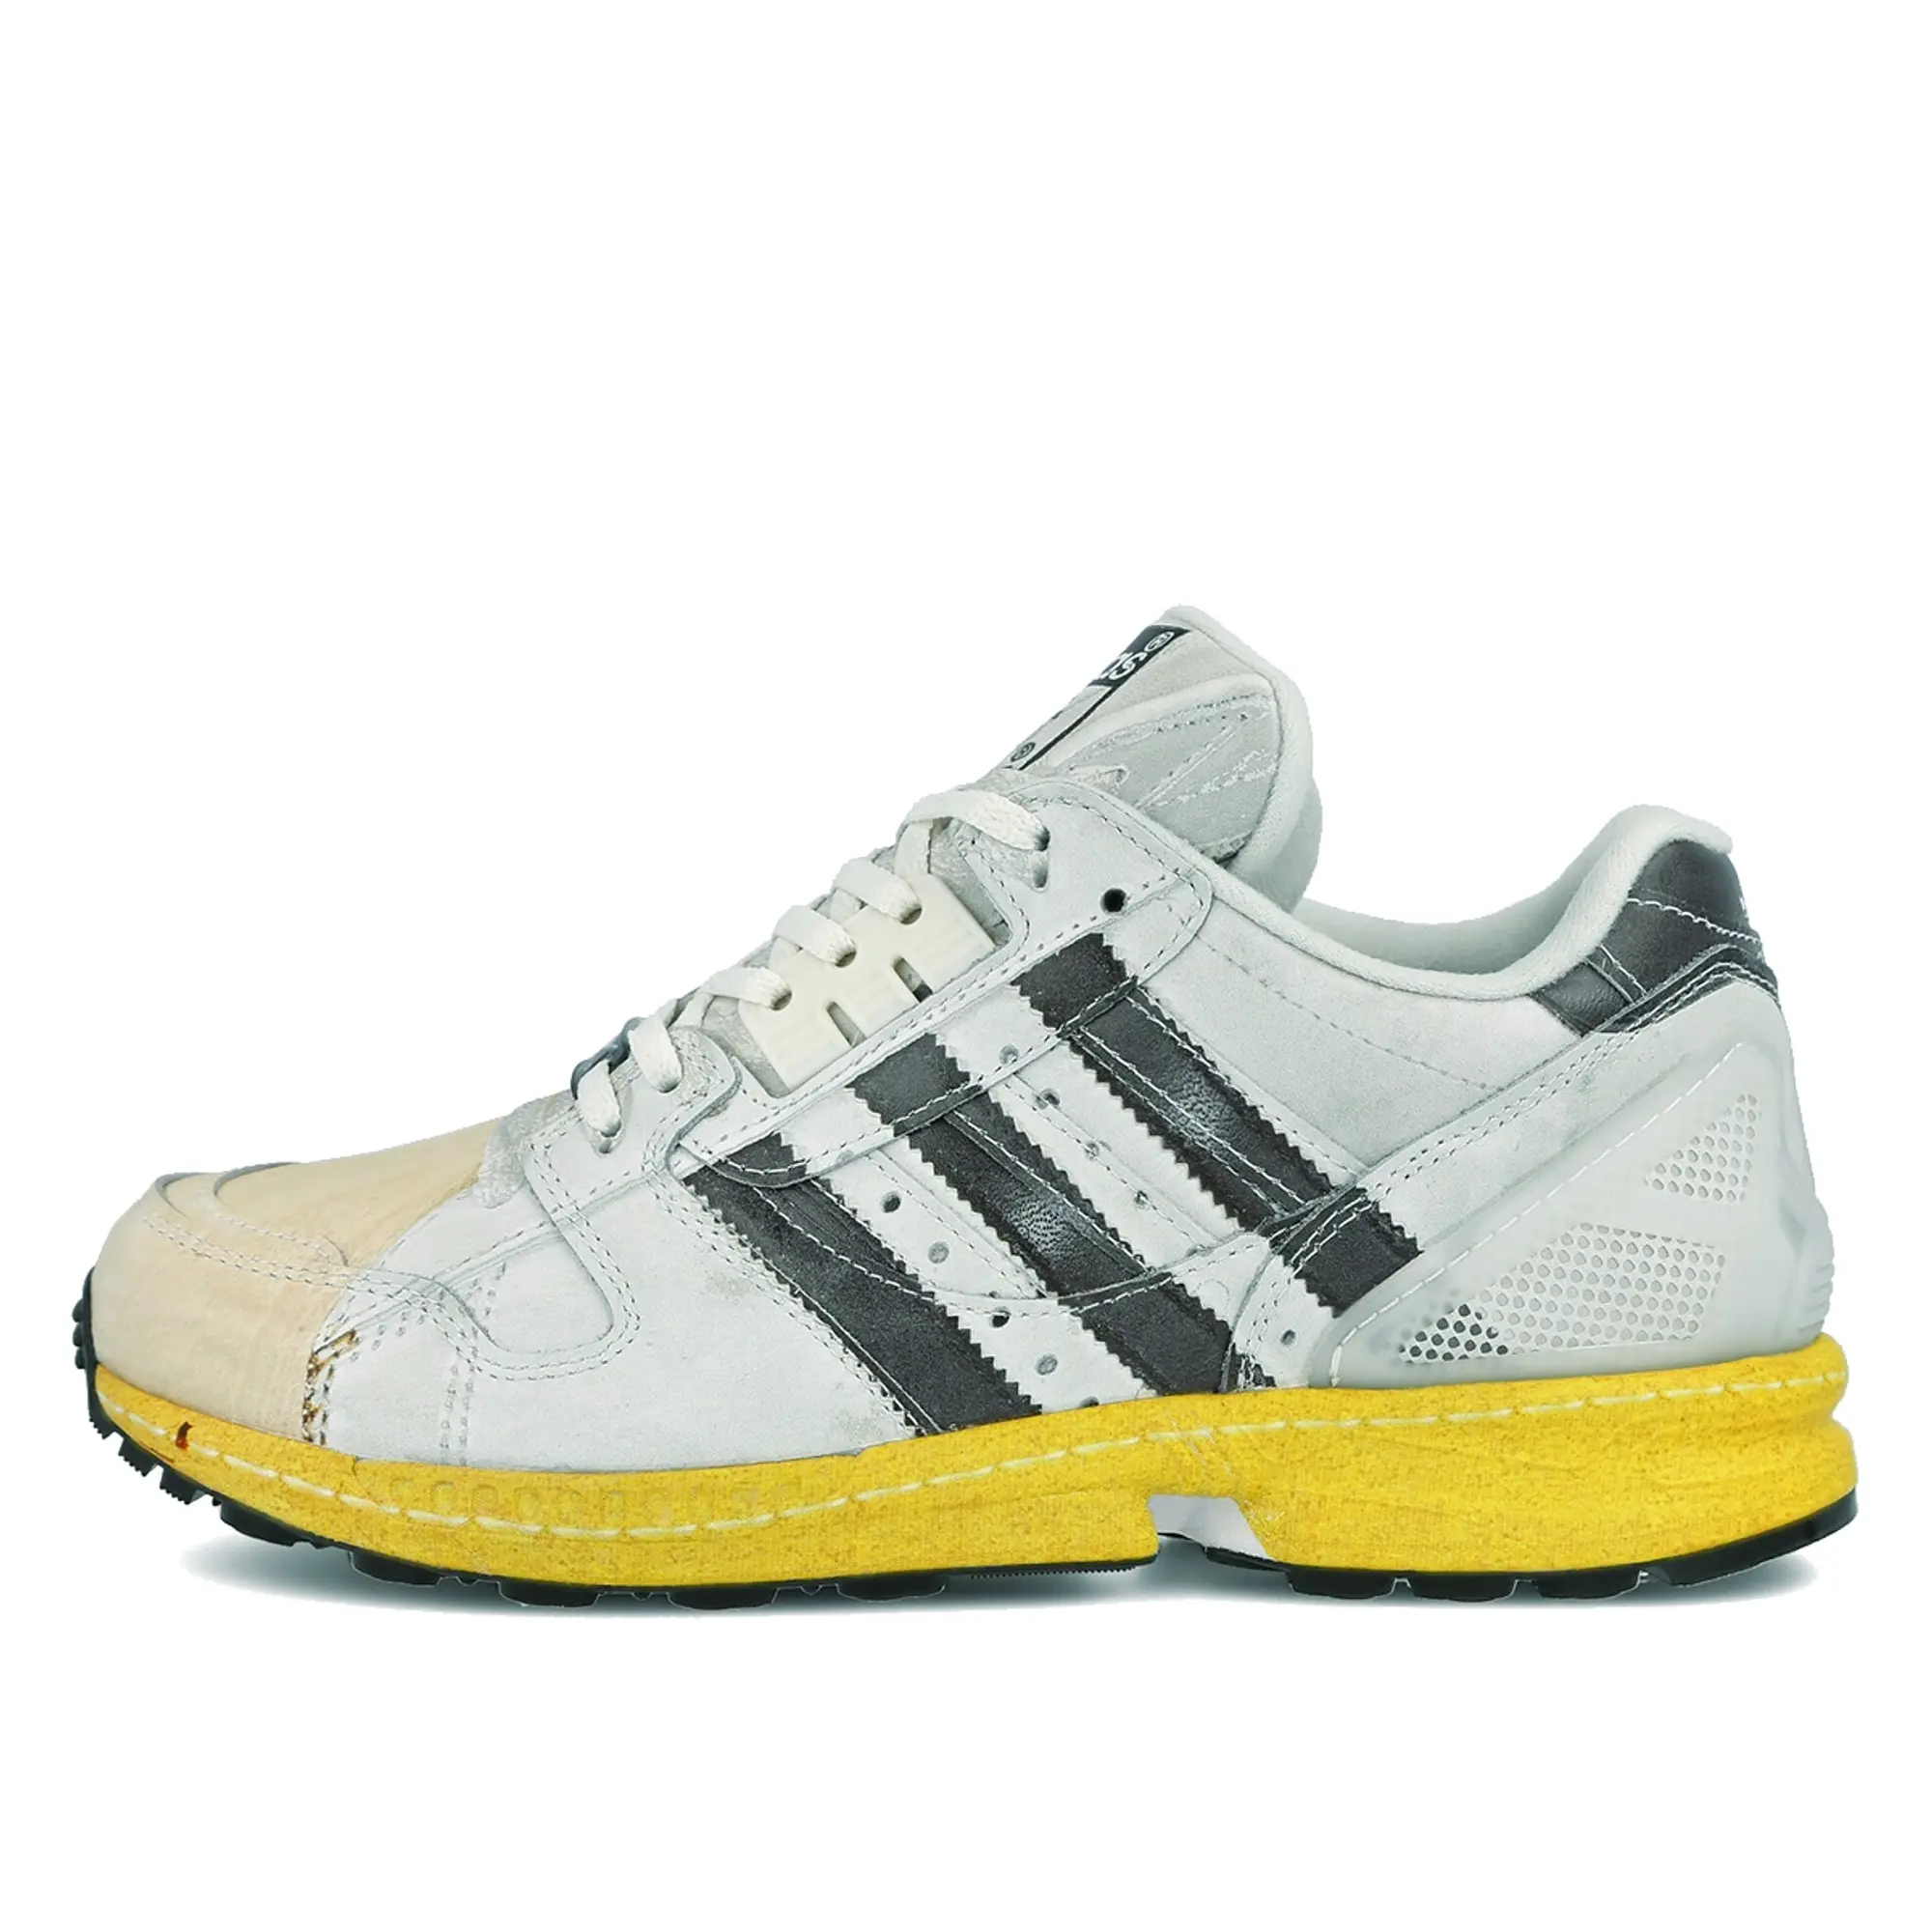 adidas ZX 8000 Superstar Shoes Shoes